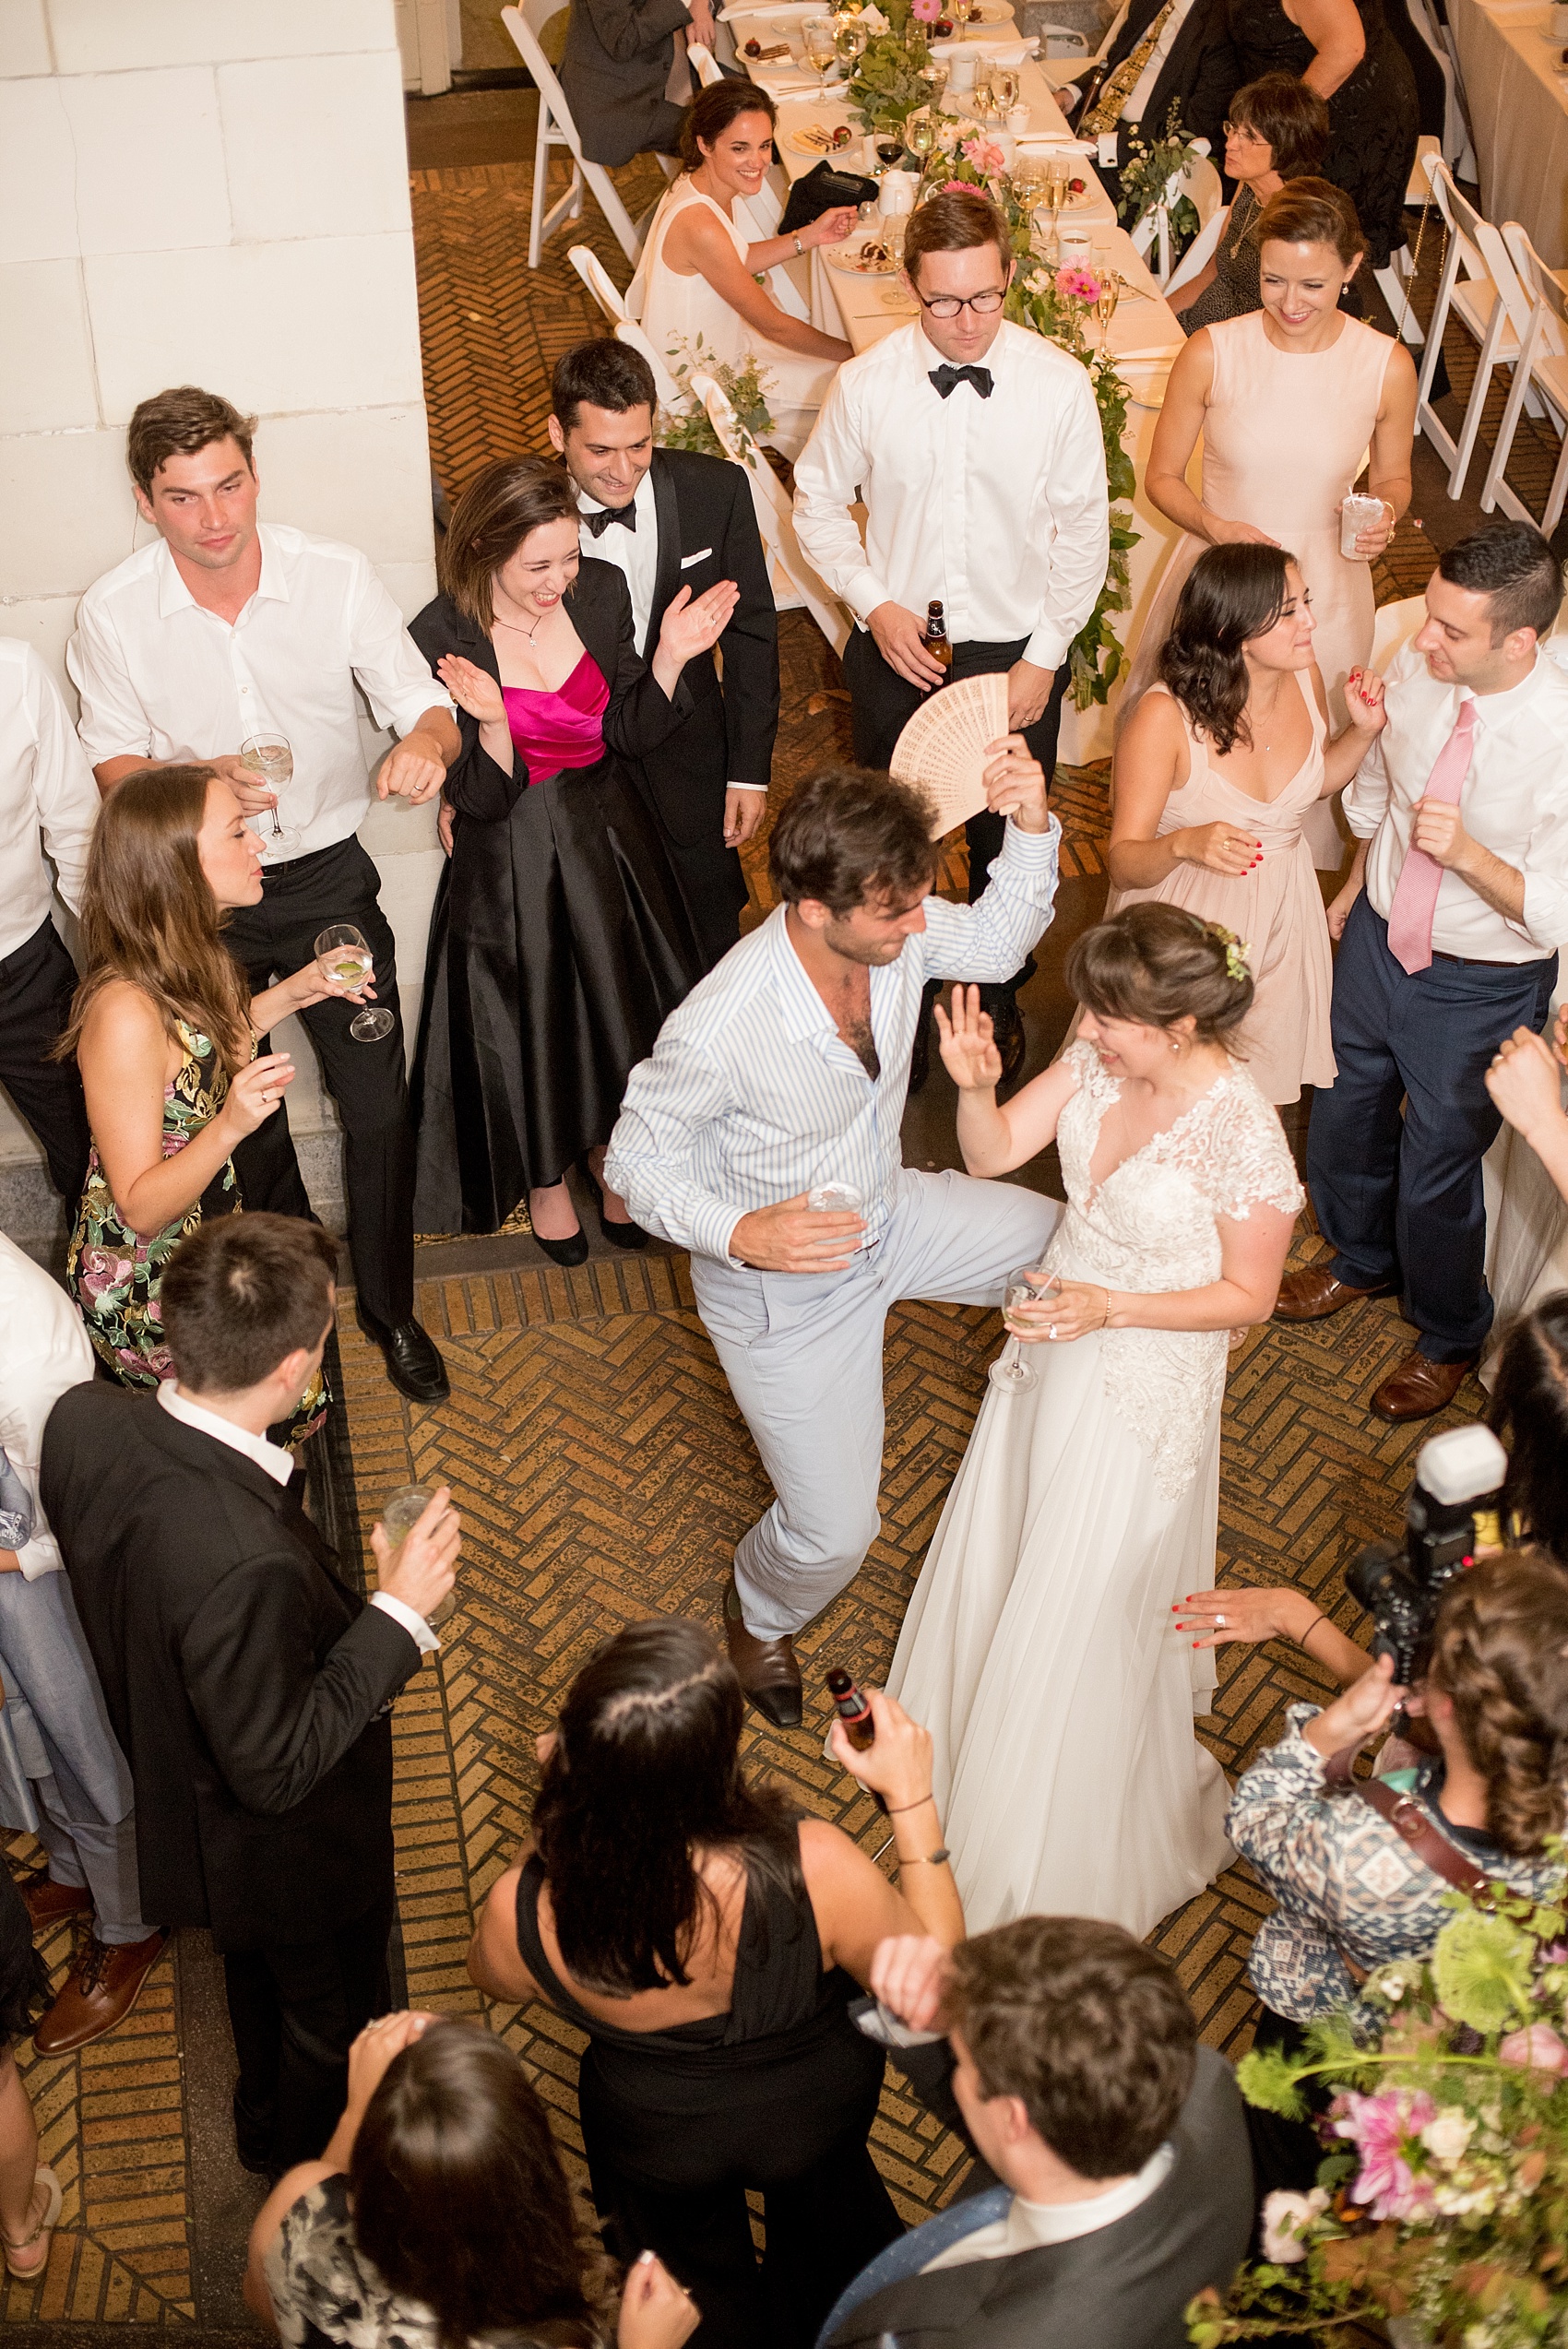 Mikkel Paige Photography photos of a wedding at Brooklyn's Prospect Park Boathouse in NYC.